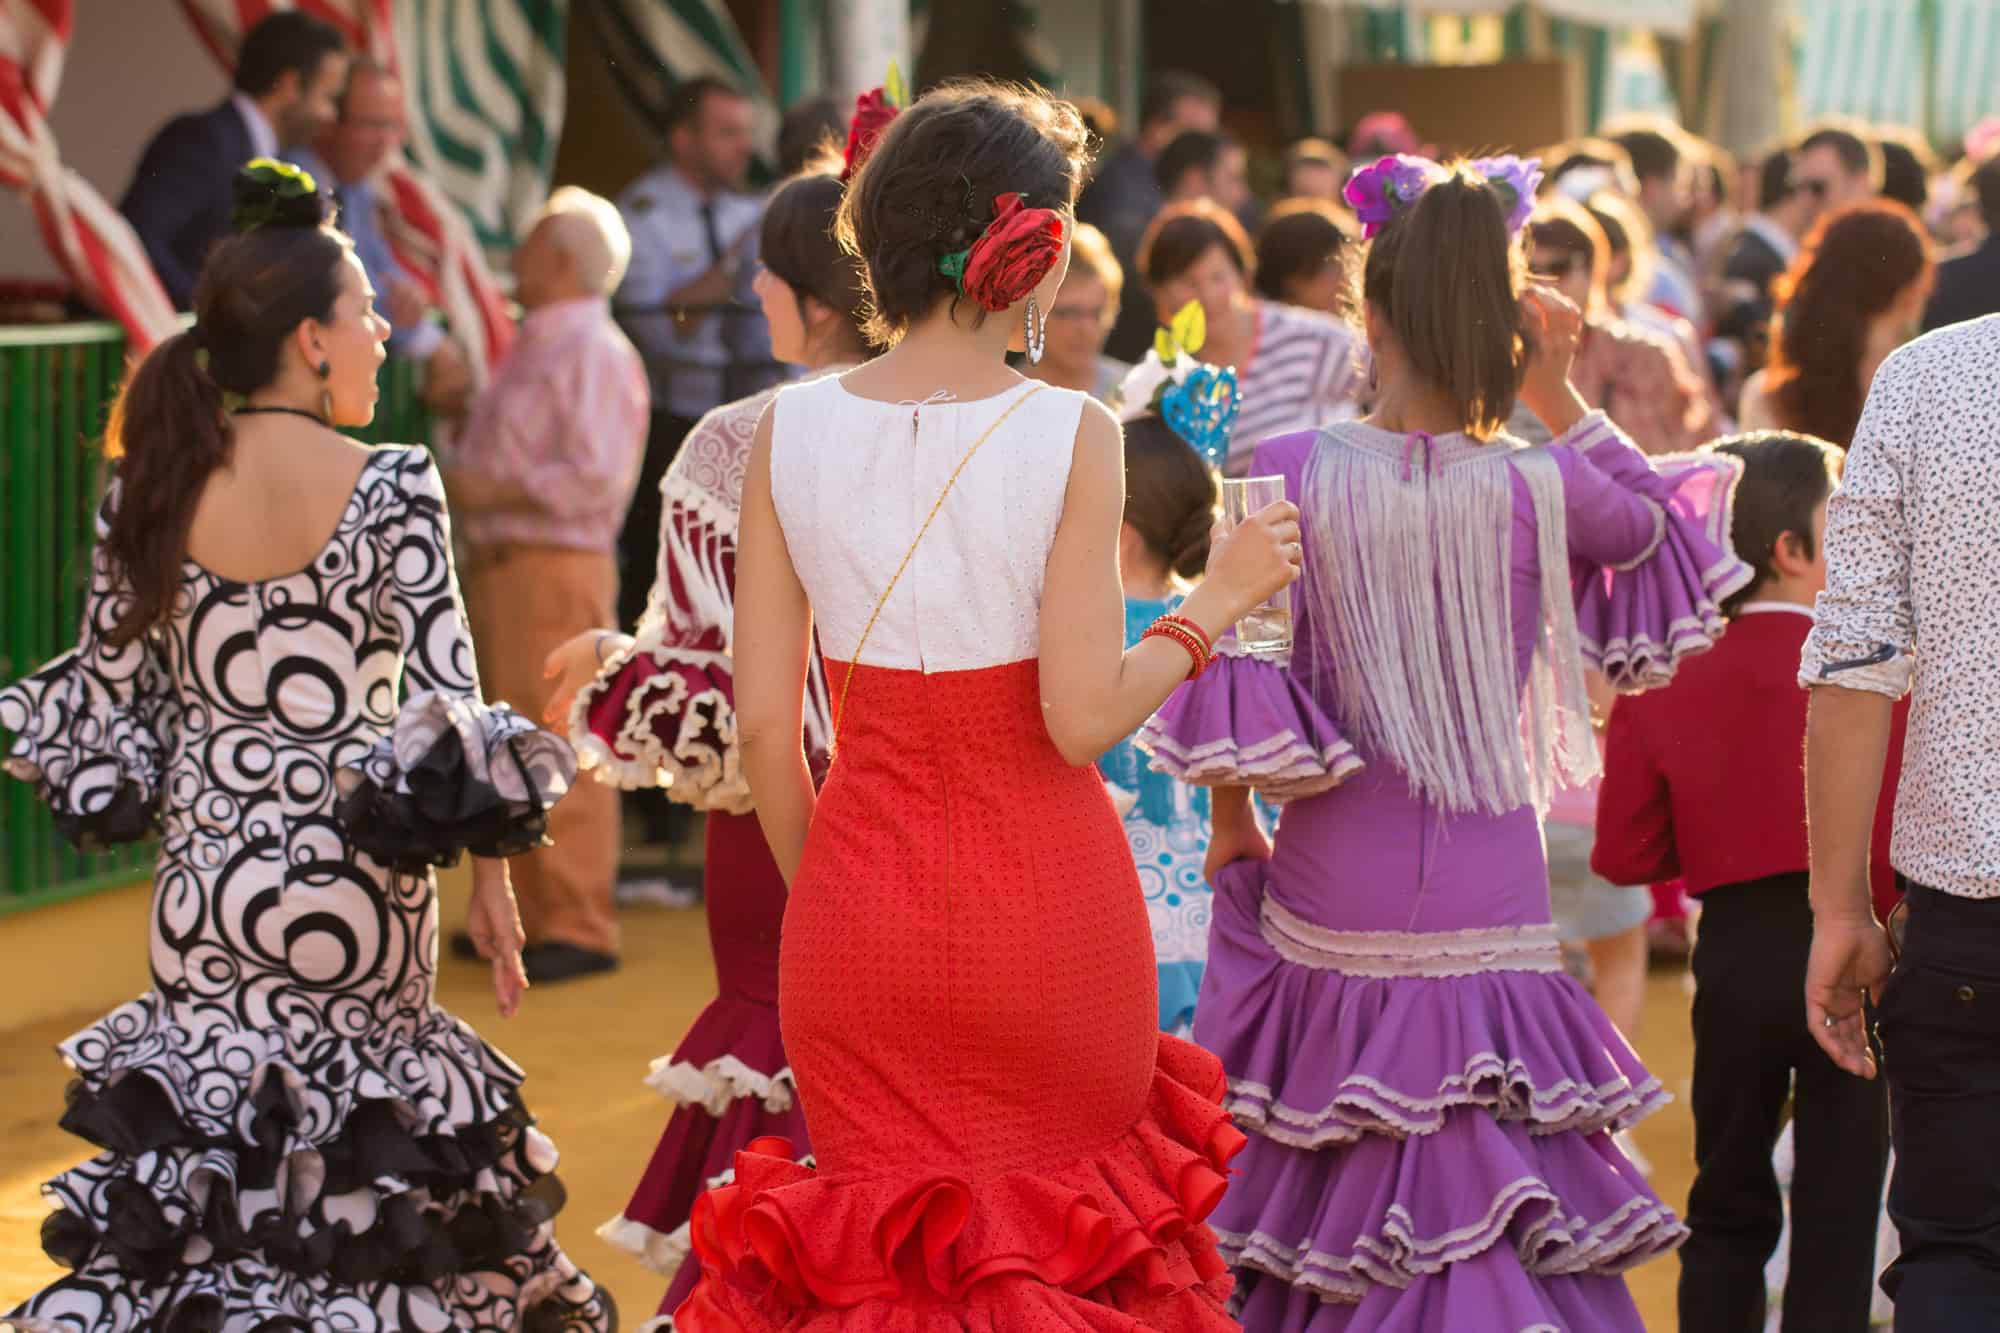 Women dressed in traditional costumes at the Seville's April Fair